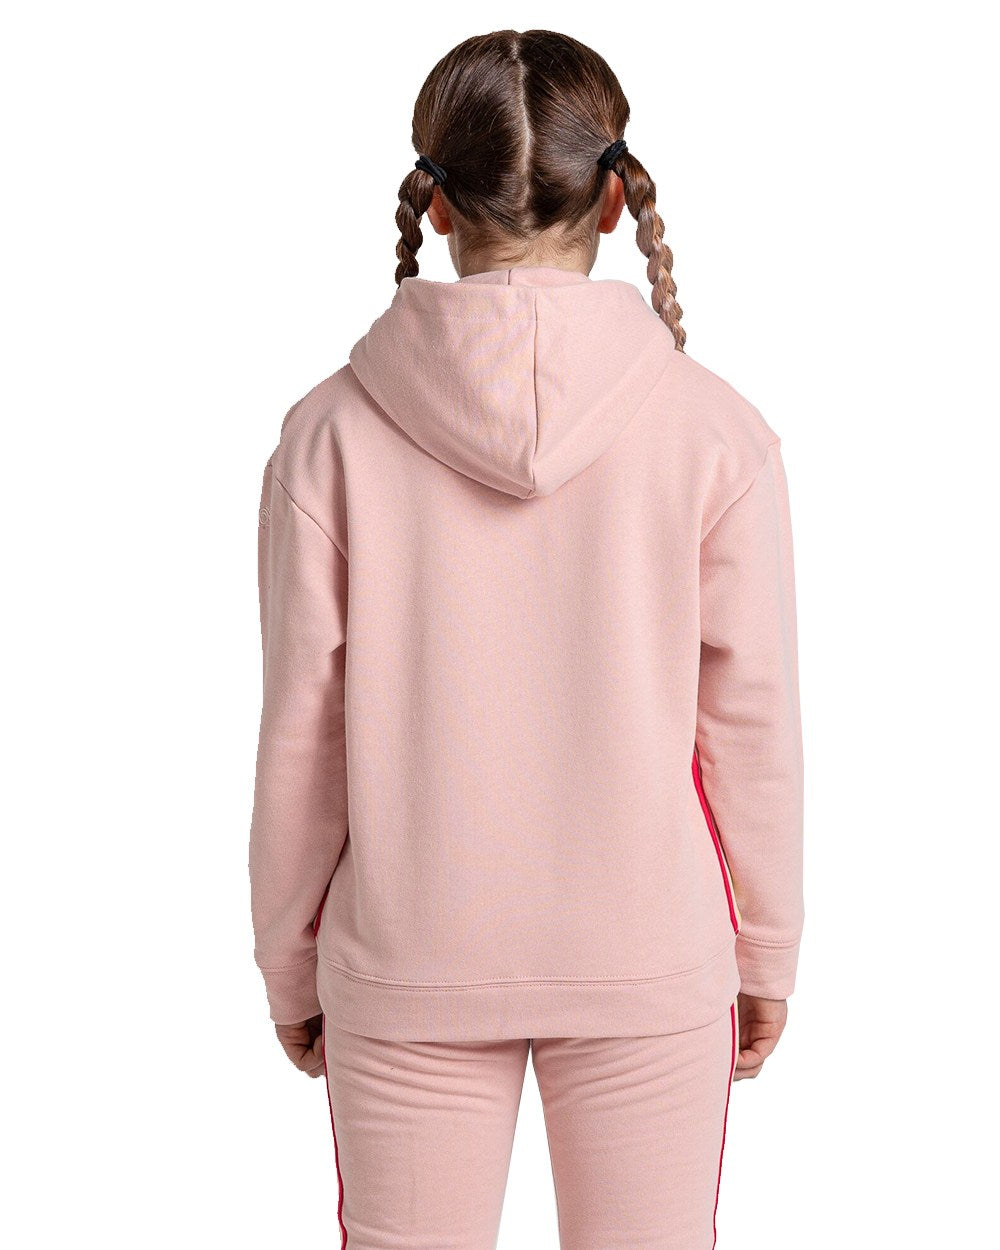 Pink Clay Coloured Craghoppers Childrens NosiLife Baylor Hooded Top On A White Background 